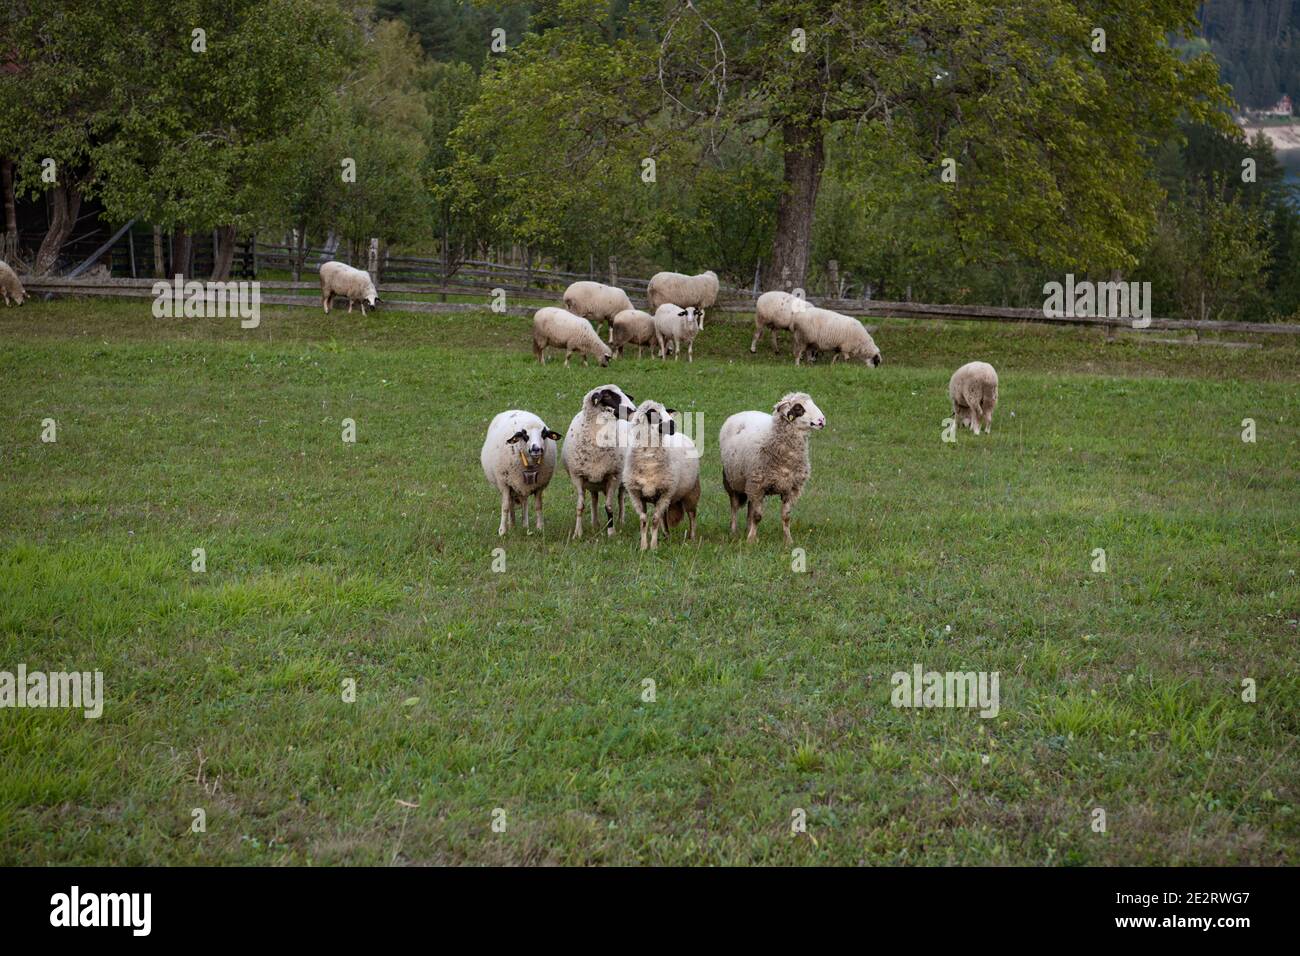 A flock of sheep grazing on the grass, on meadow. Stock Photo